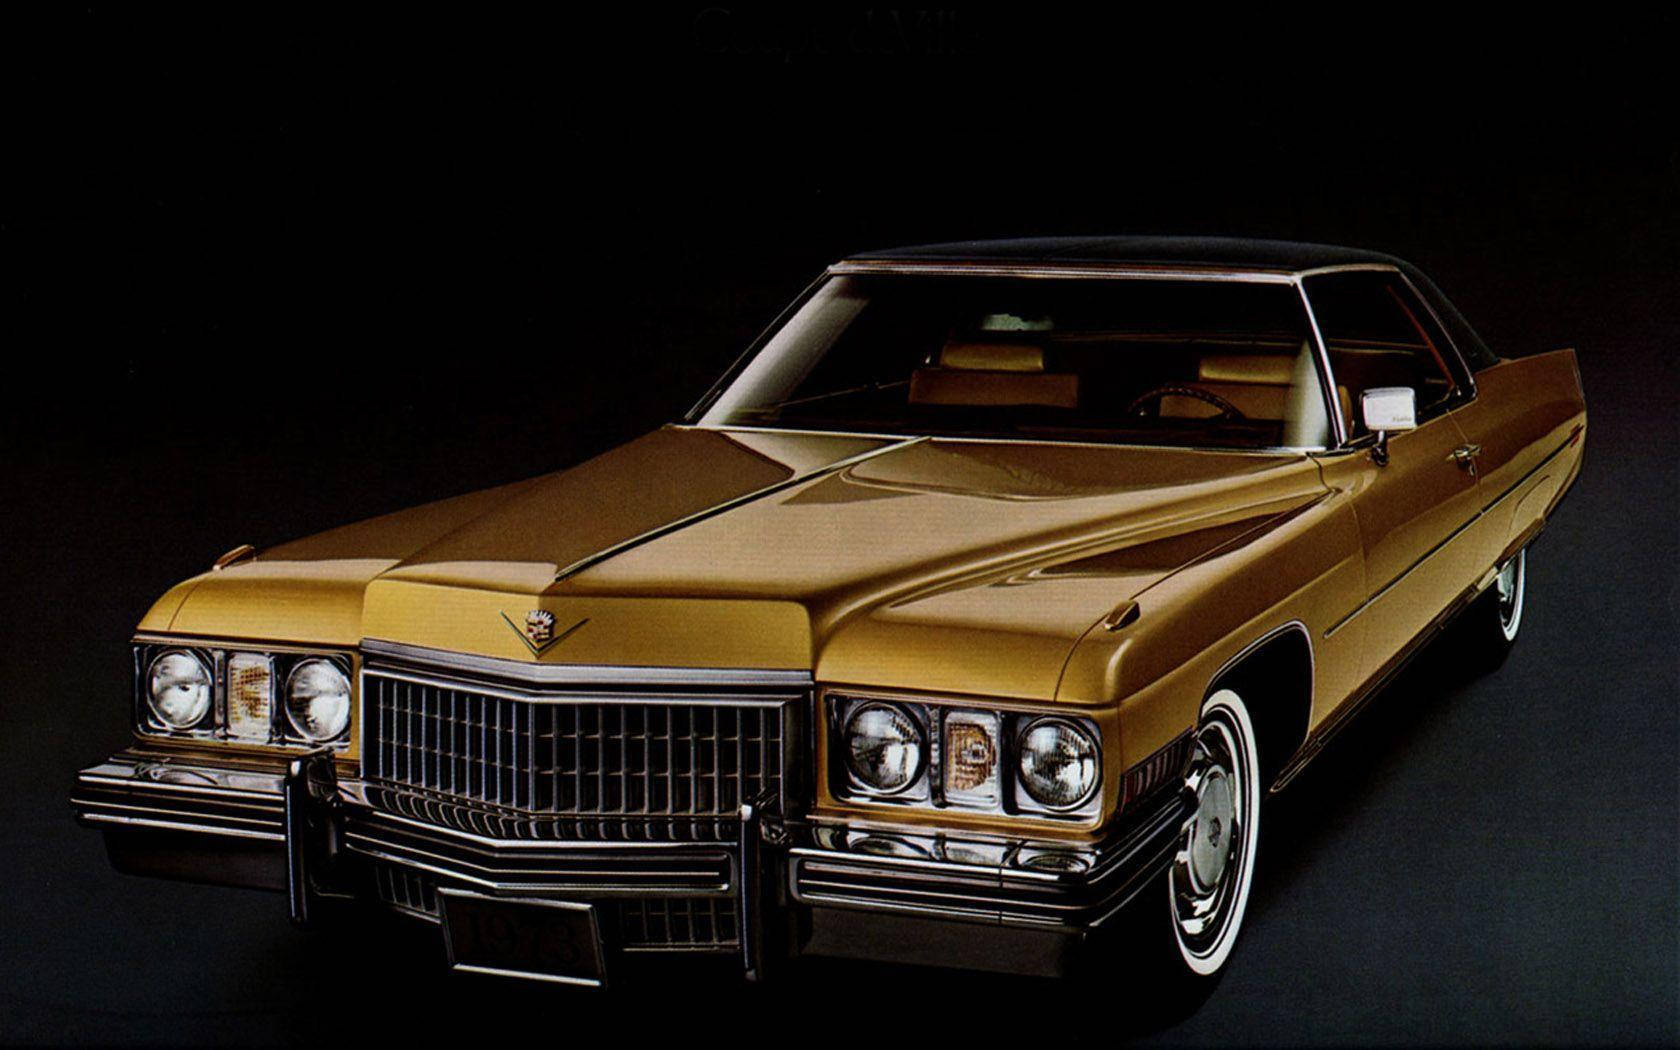 Classic Brown Cadillac Car Background